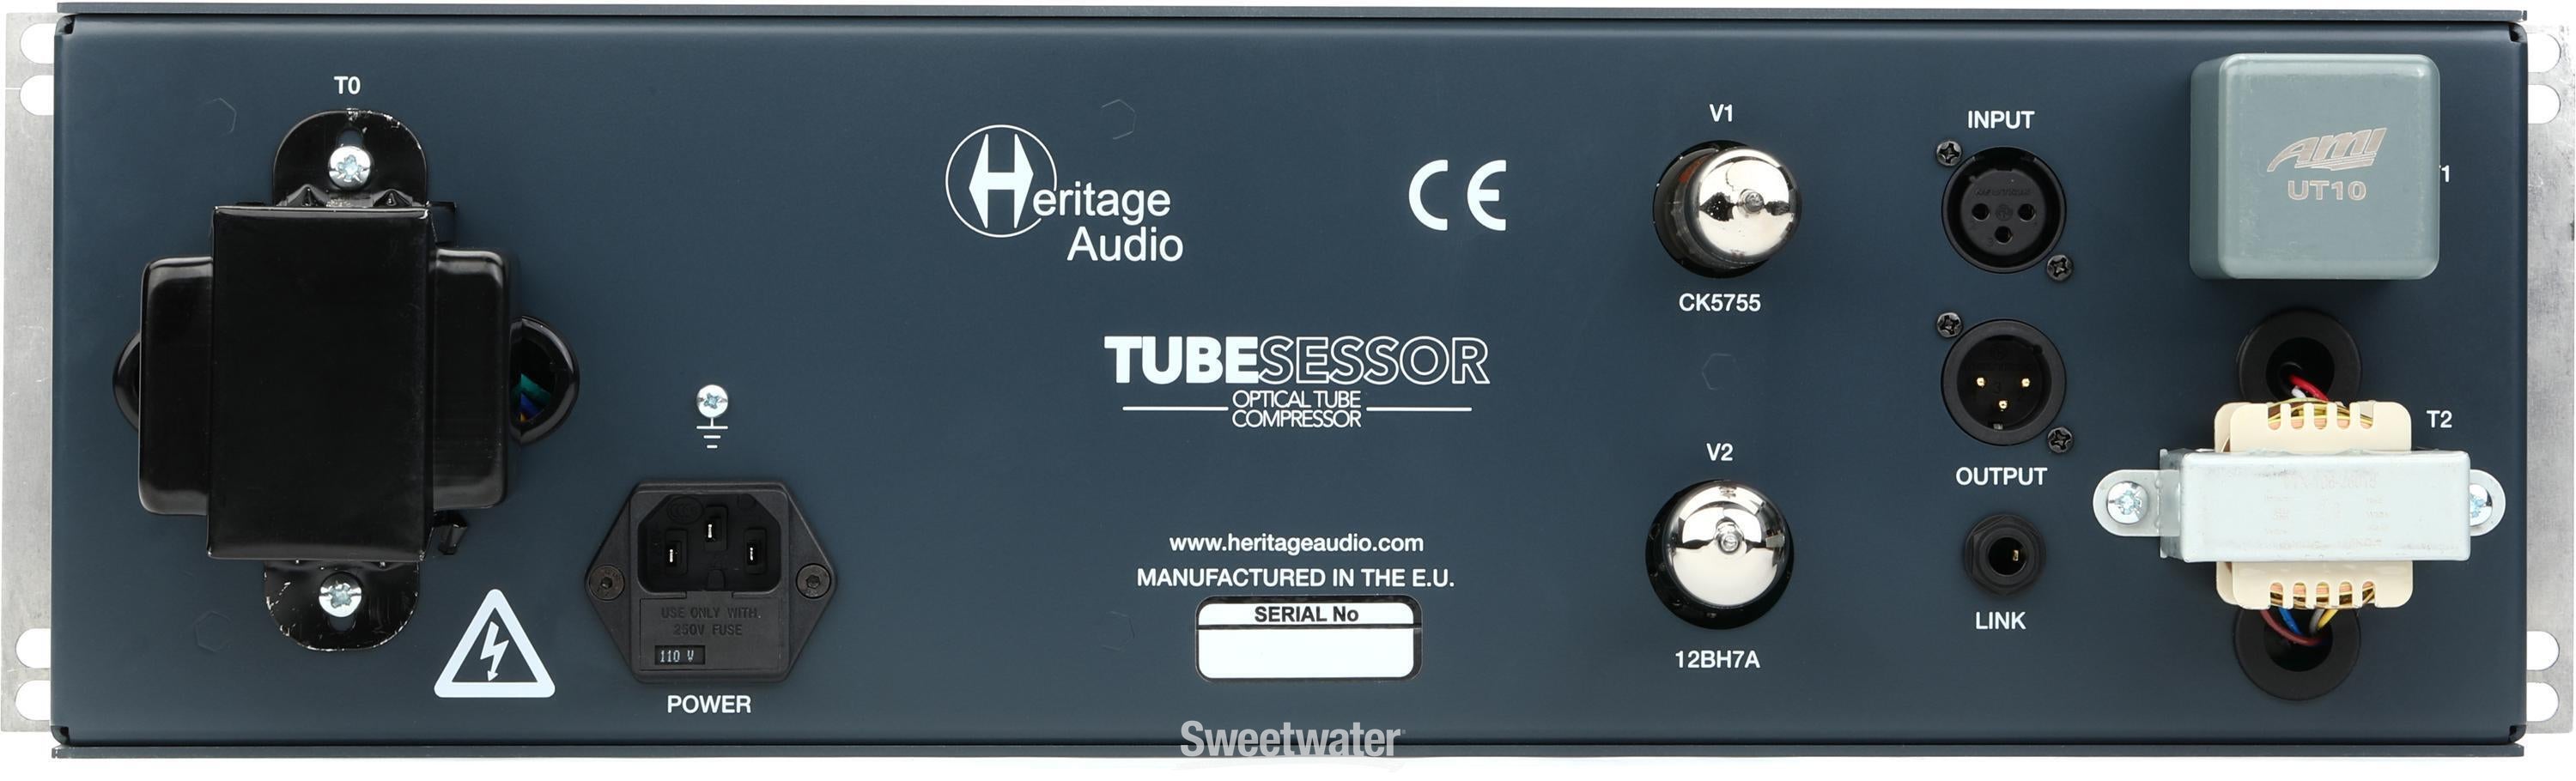 Heritage Audio Tubesessor Optical Tube Compressor | Sweetwater